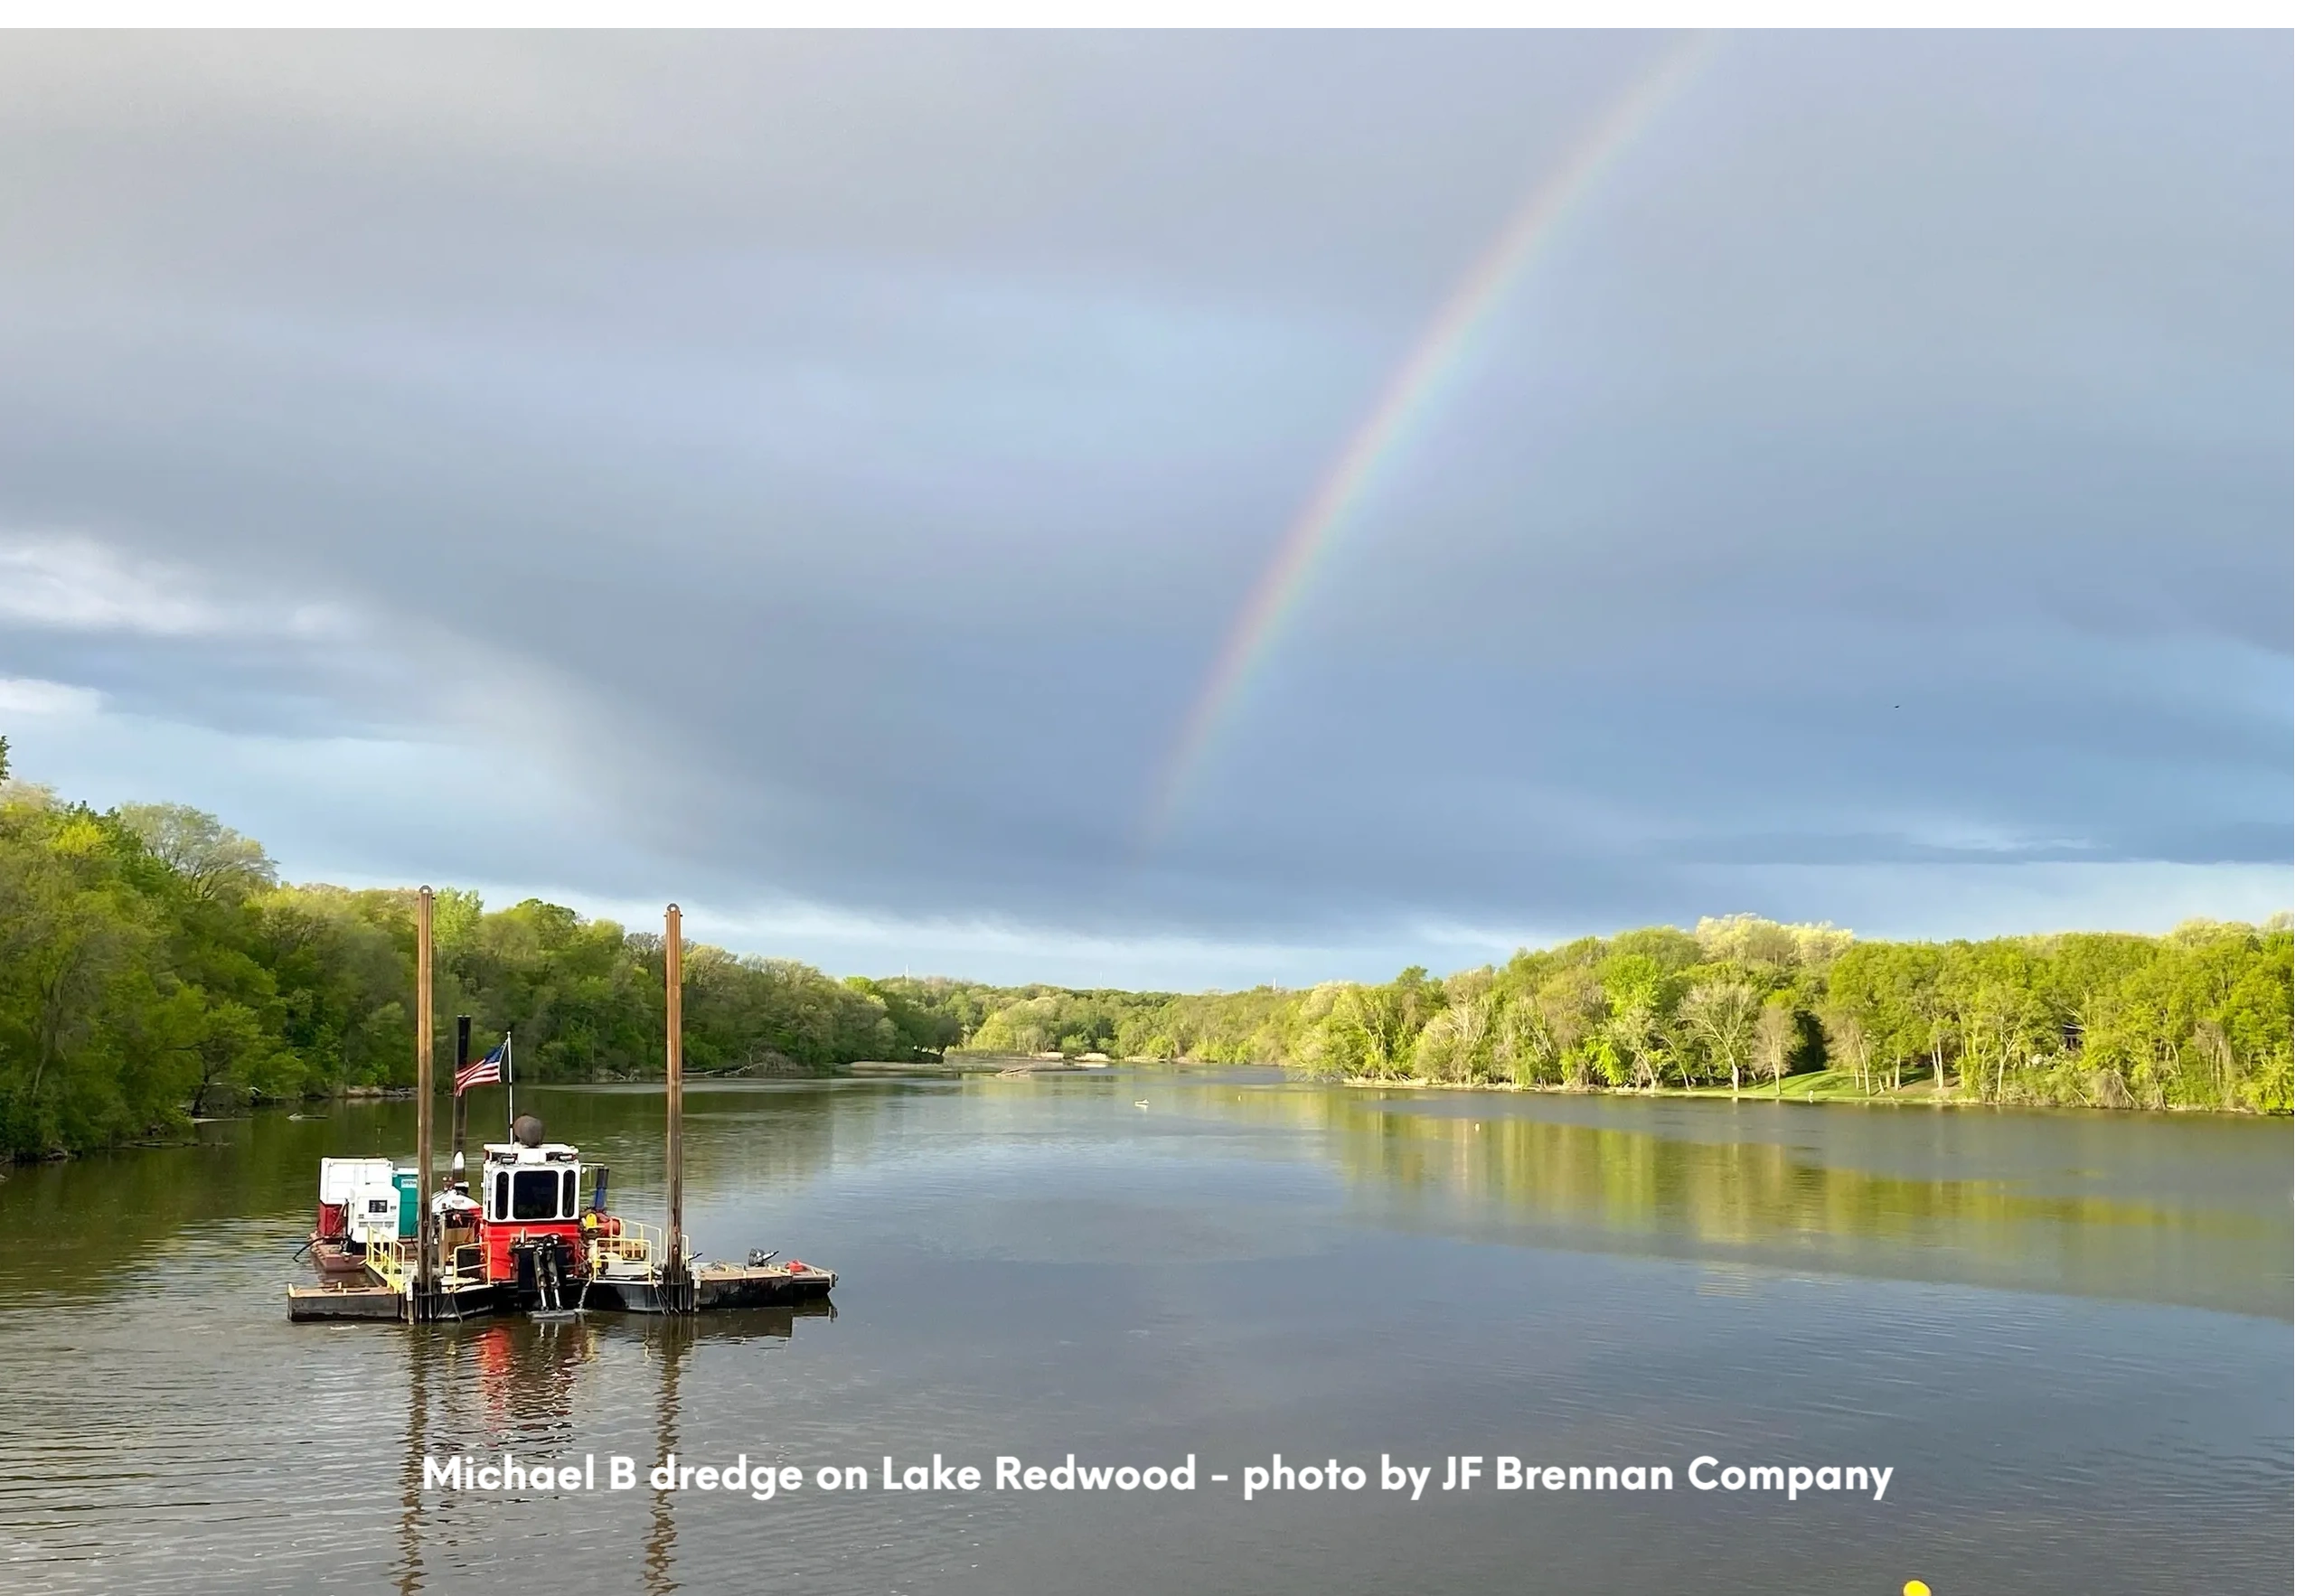 Picture of Michael B dredge on Lake Redwood with a rainbow.